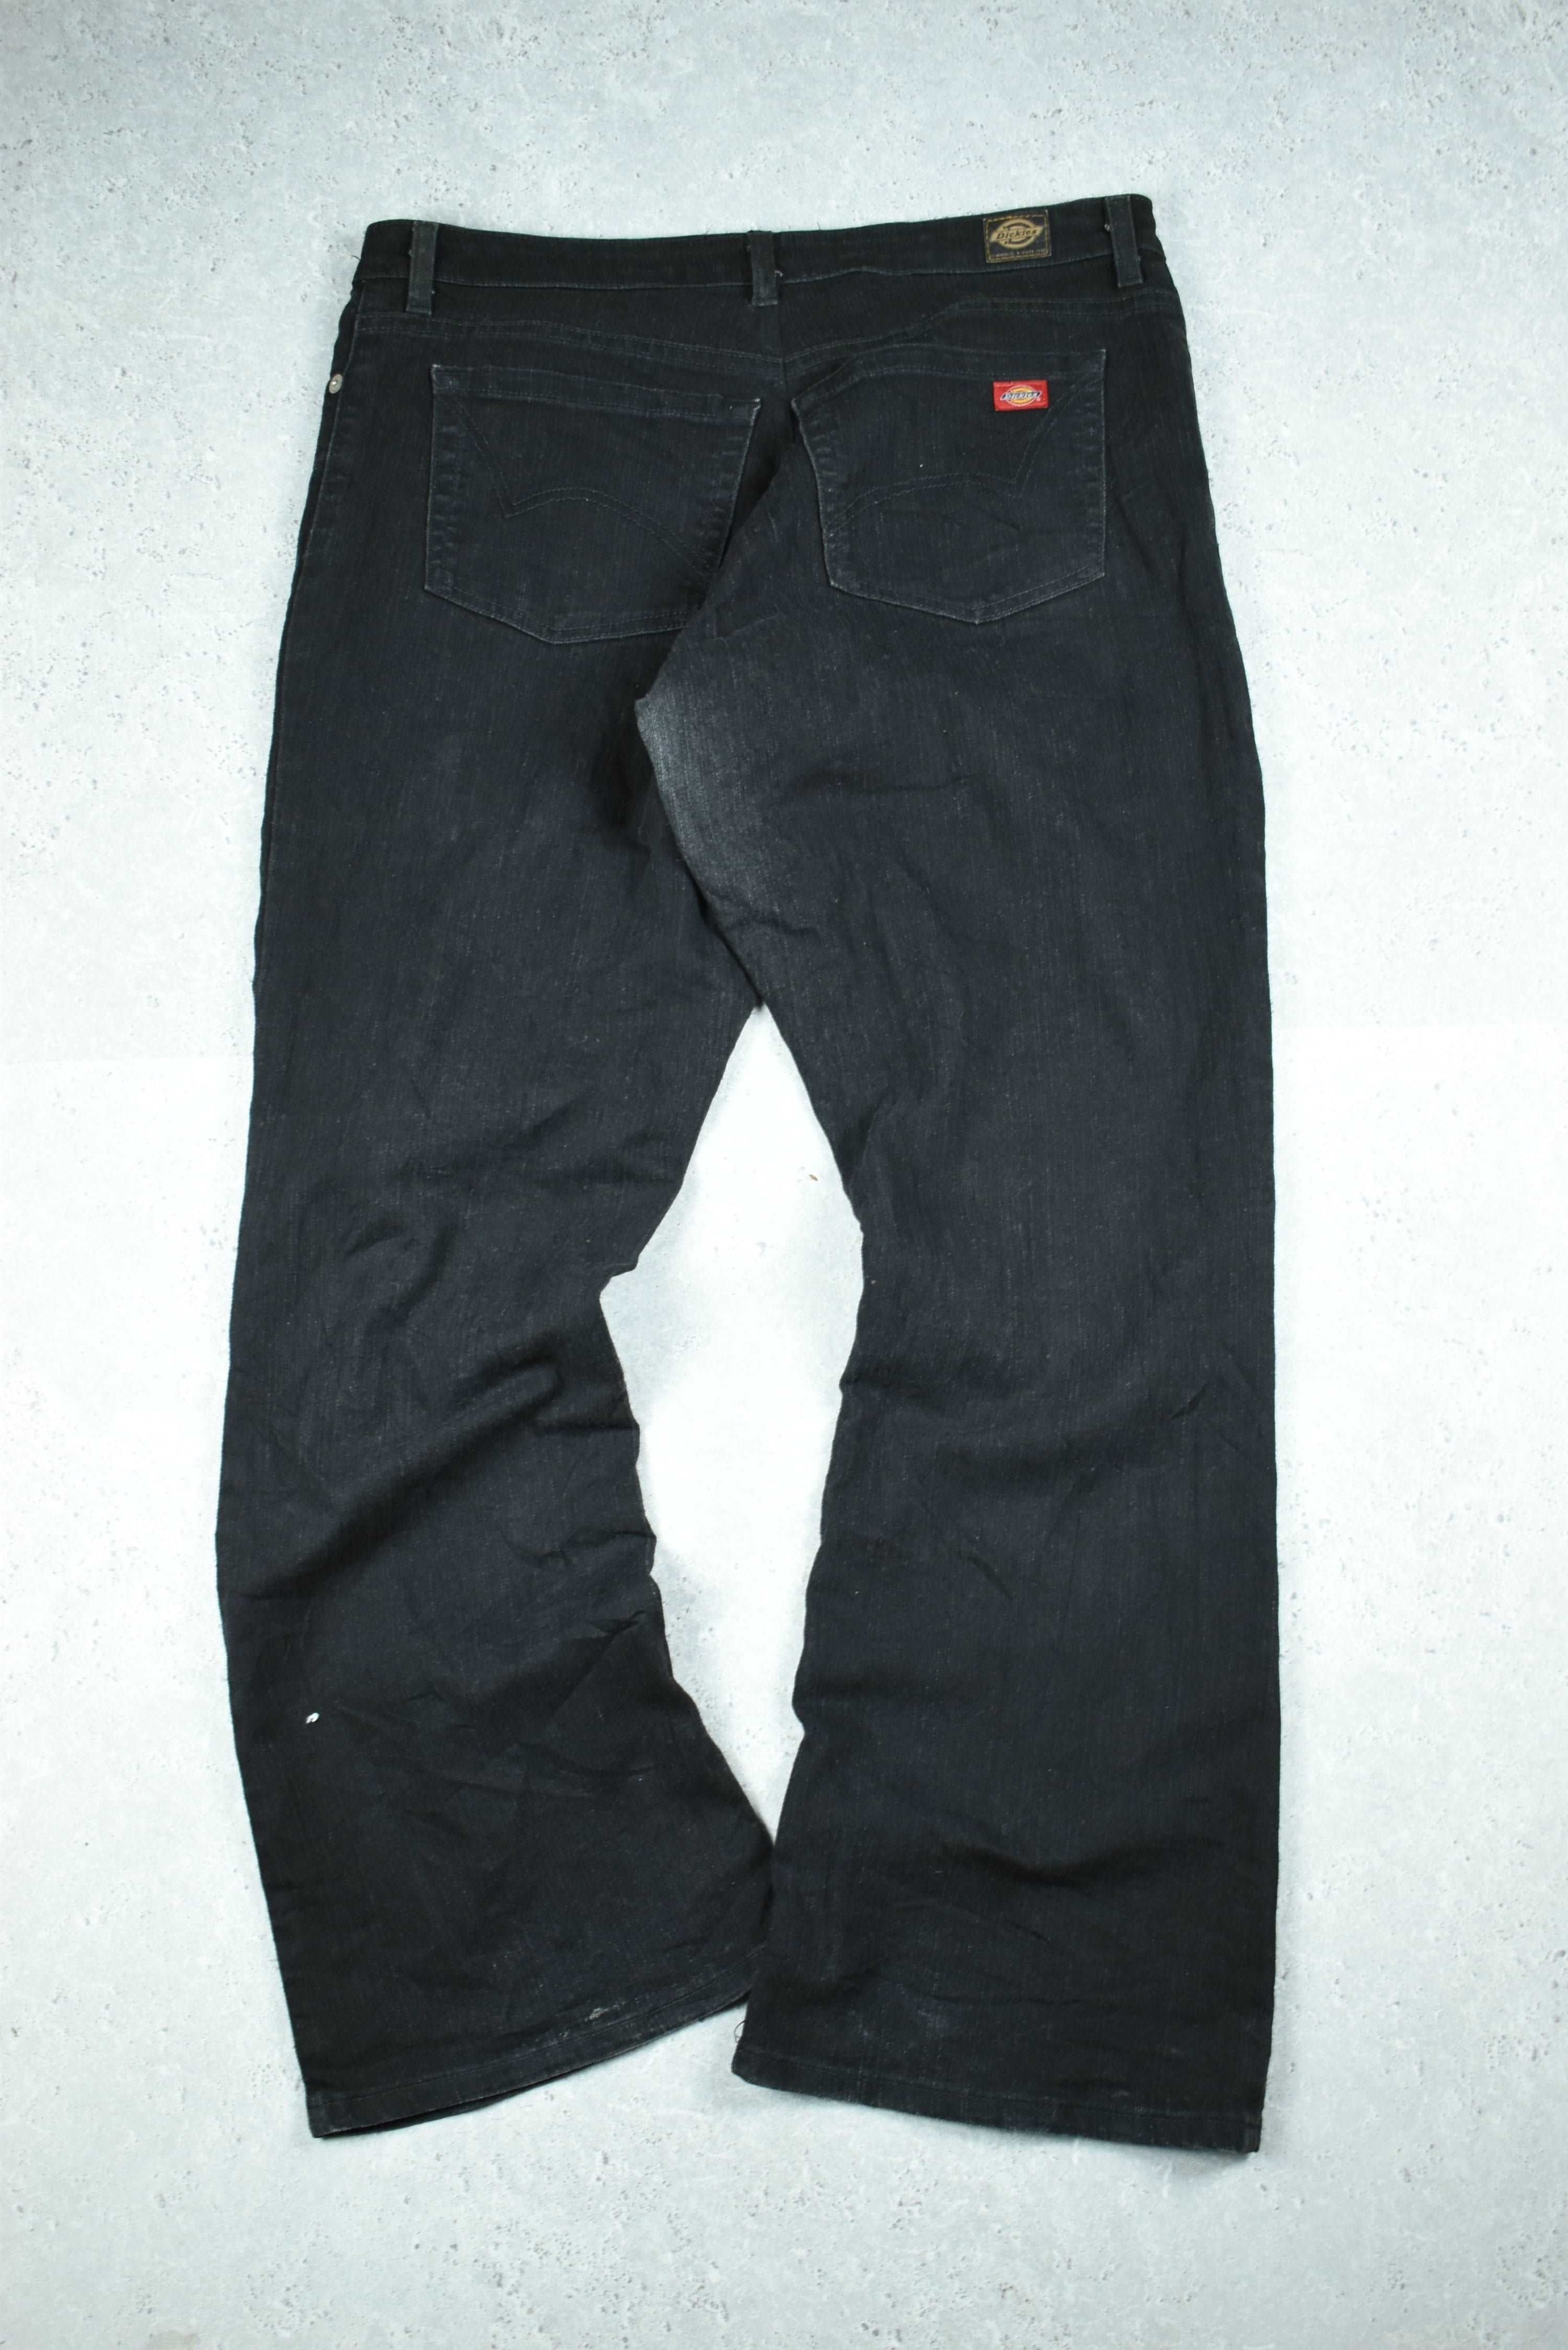 Vintage Dickies Relaxed Fit Jeans Black 36x30